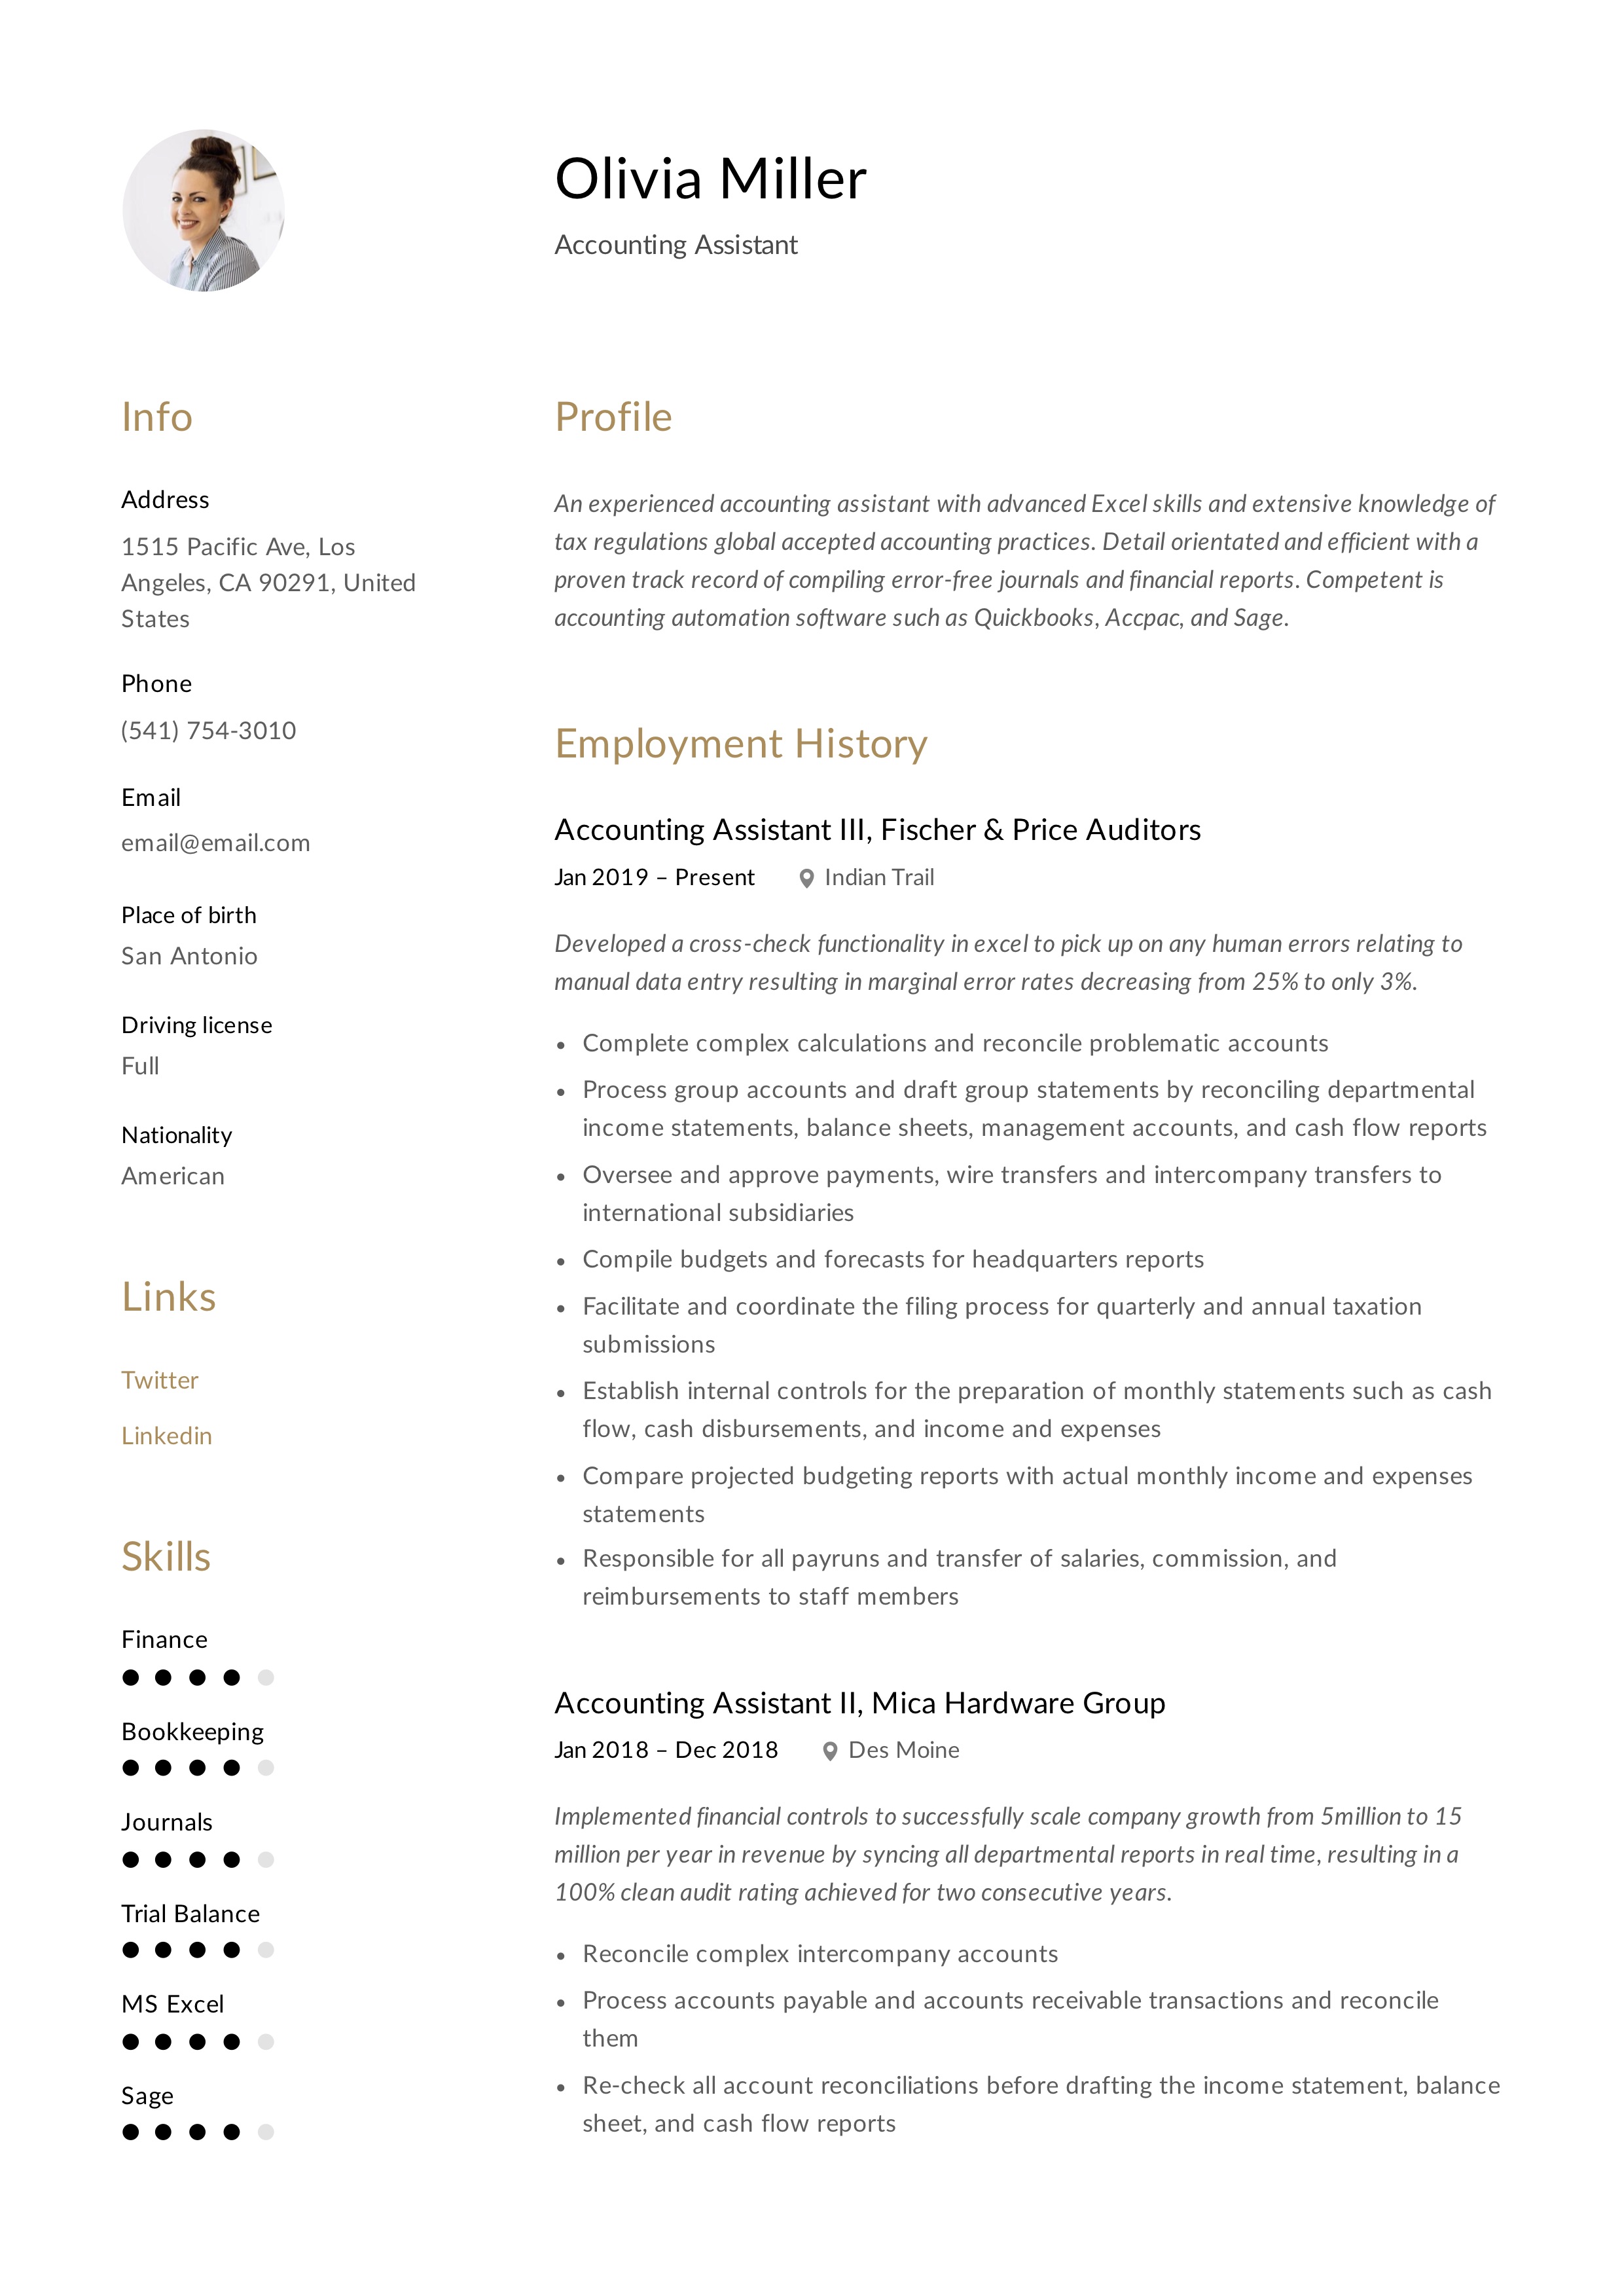 Account Assistant Resume Template